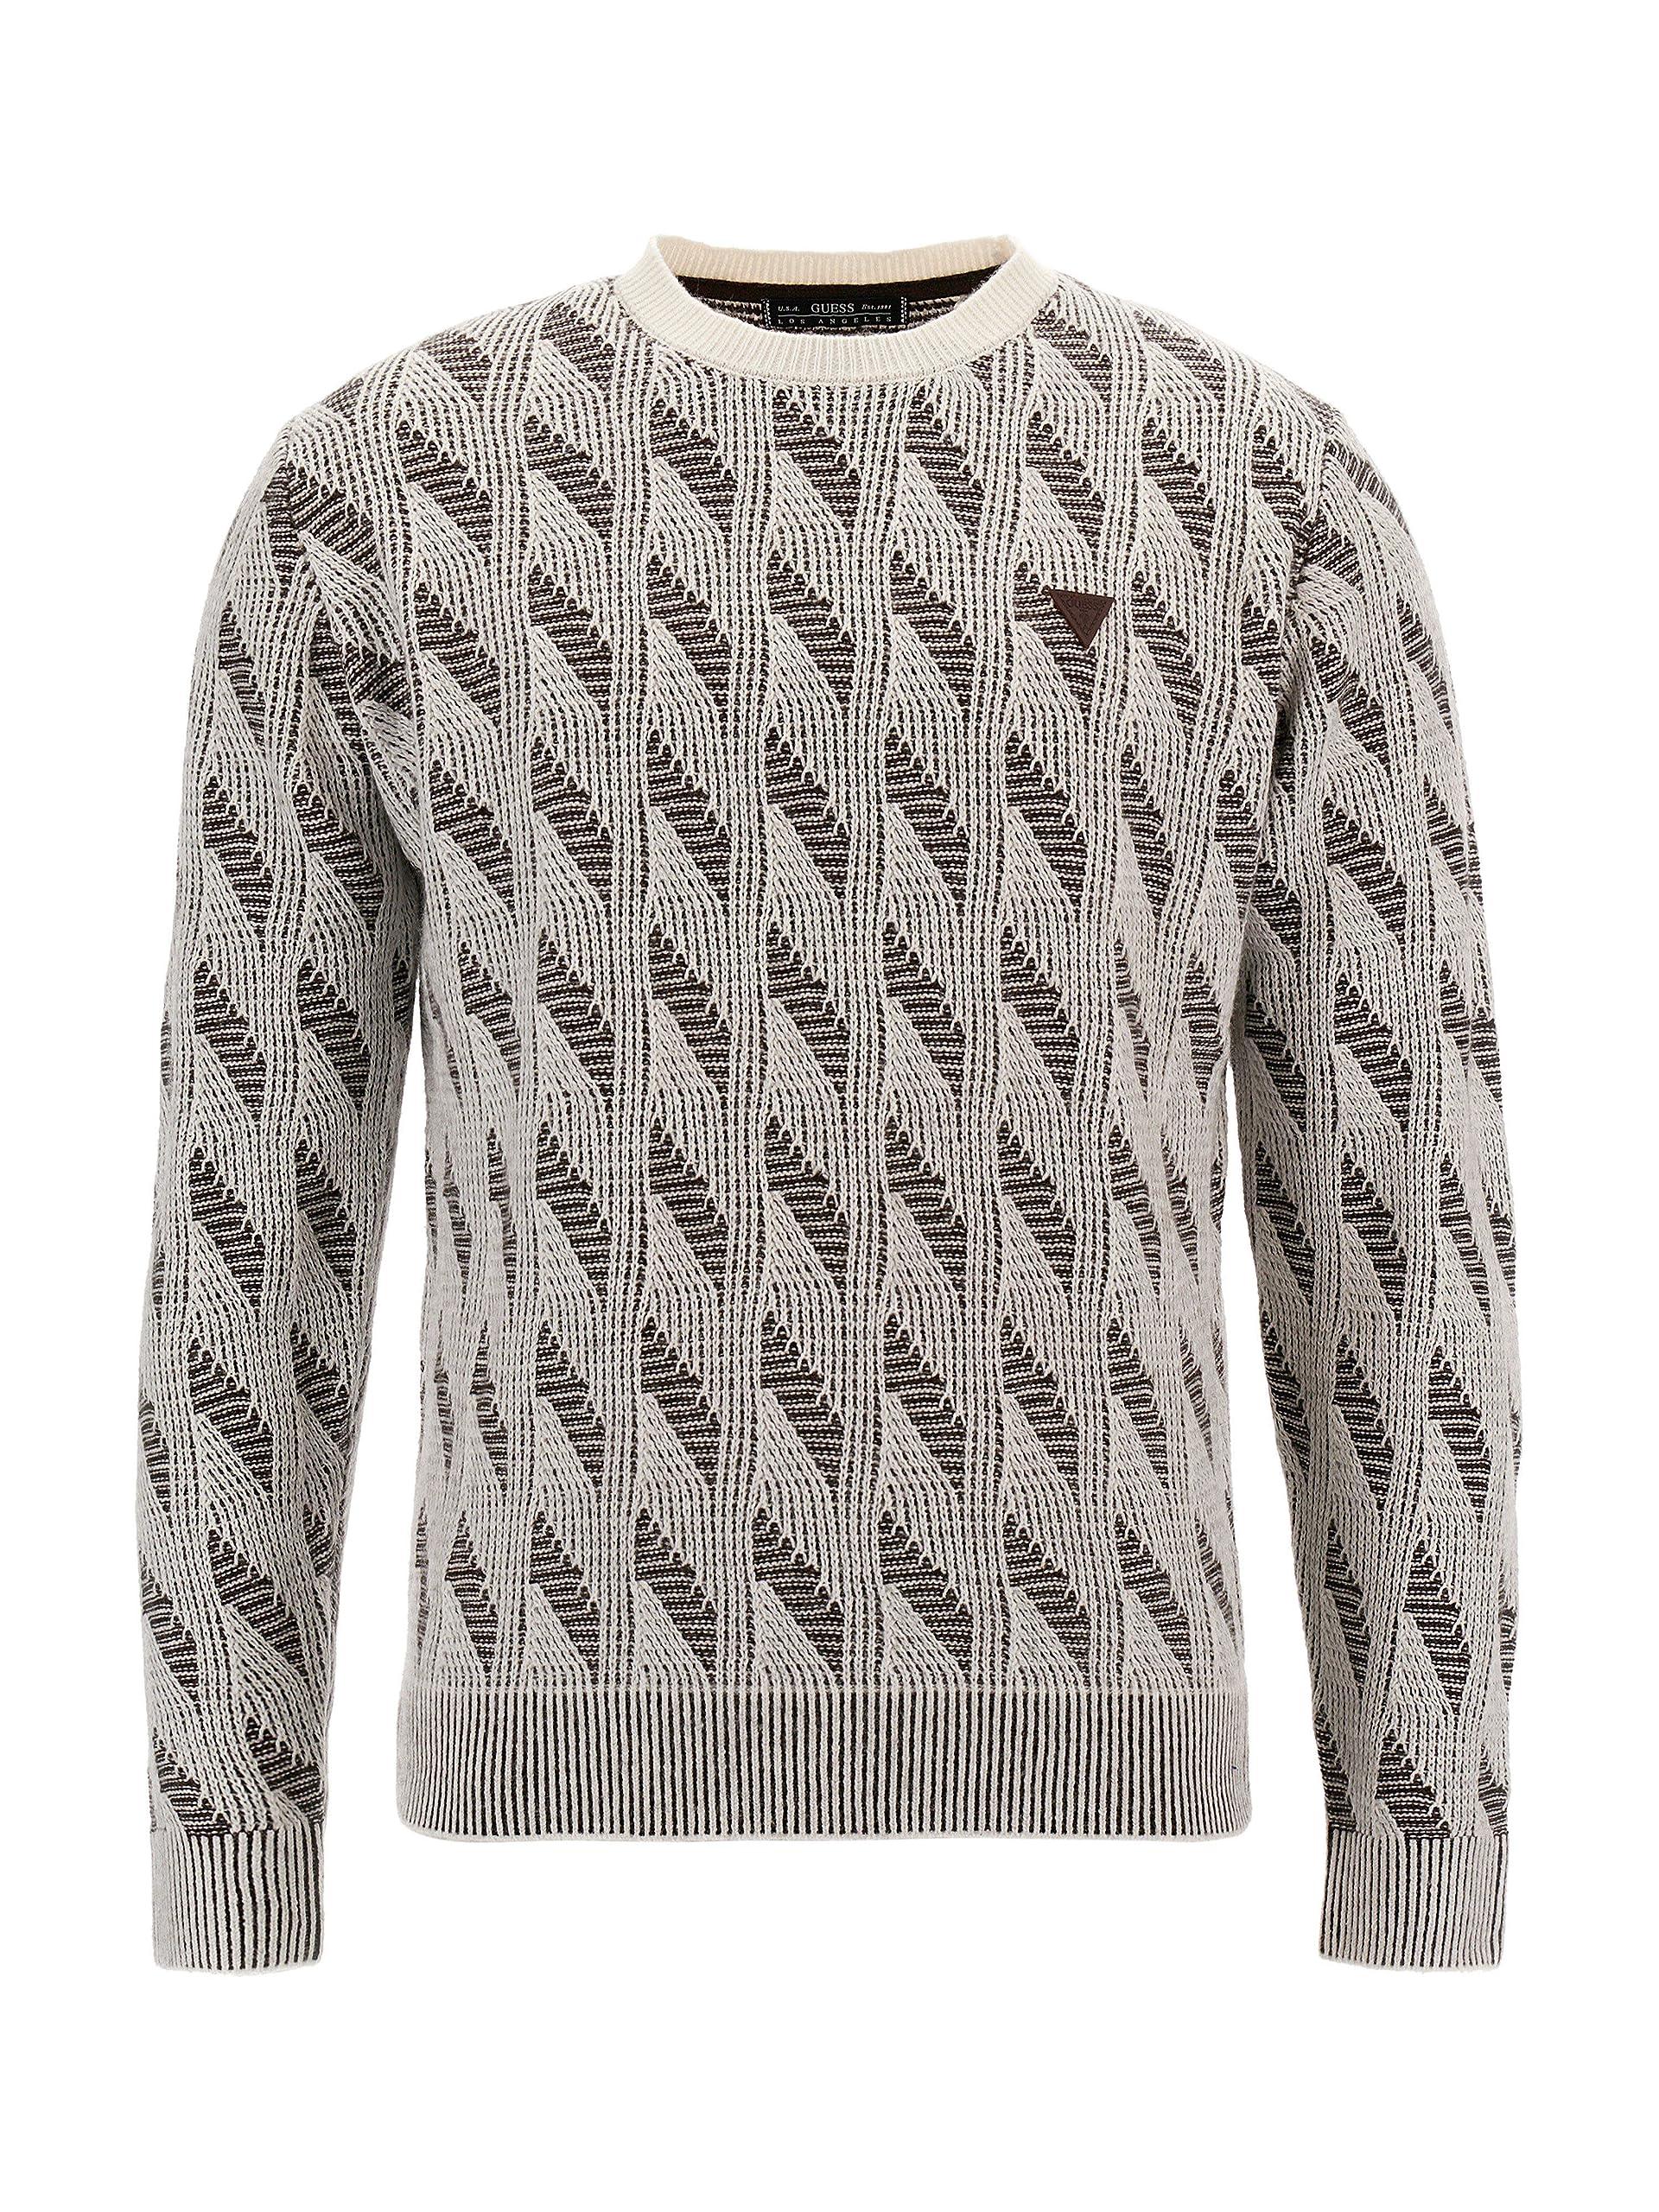 Guess Alan Long Sleeve Crew Neck Fancy Stitch Sweater in Gray | Lyst